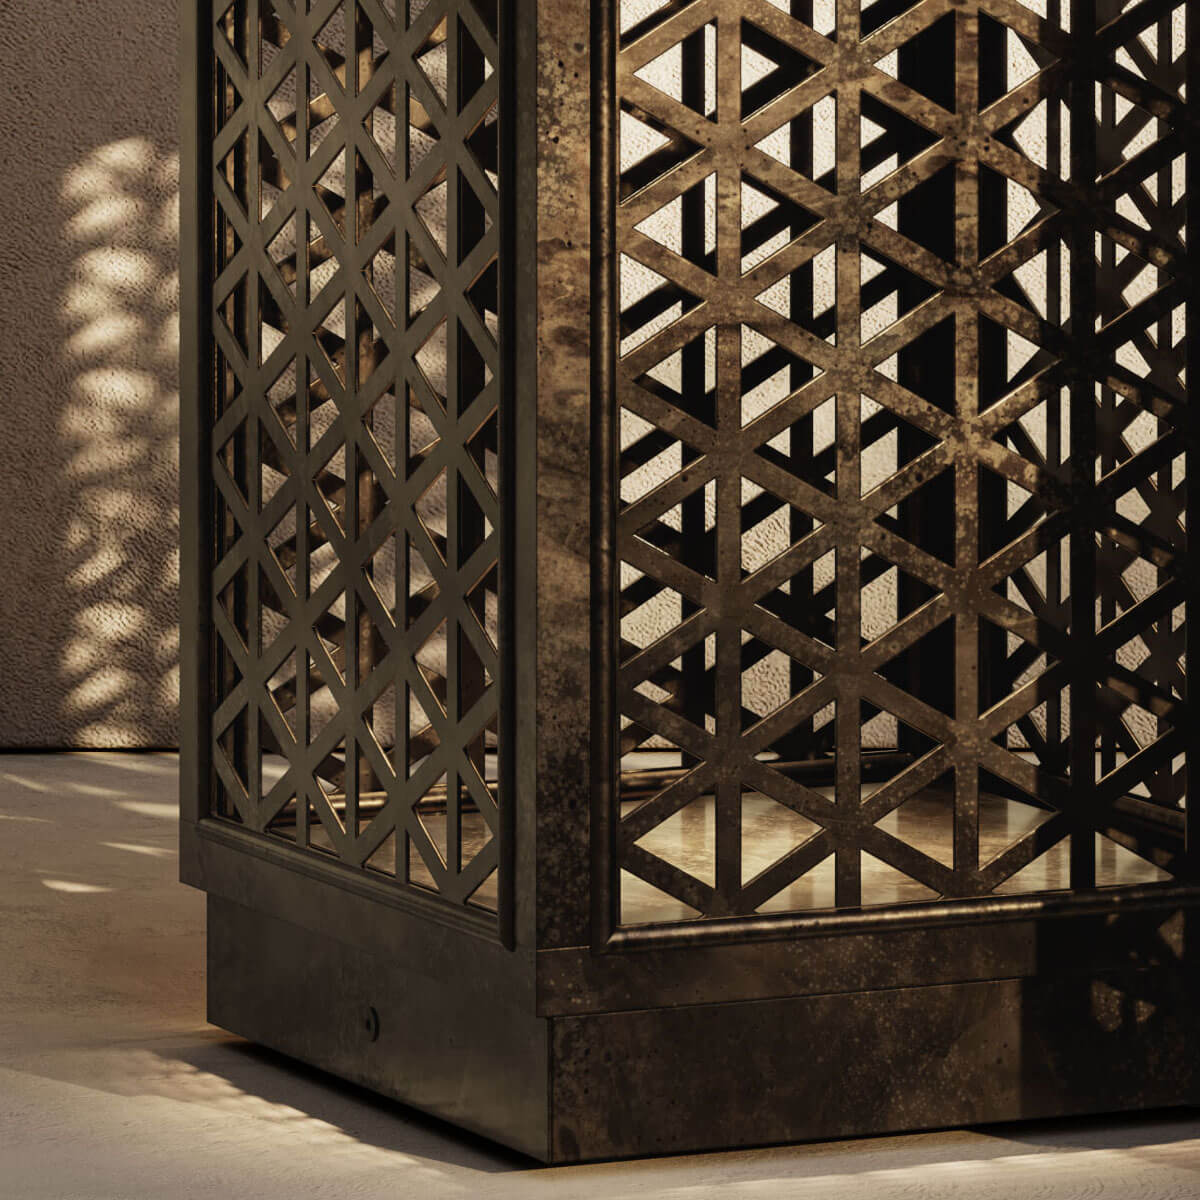 Grid lantern for outdoor use by Il Fanale